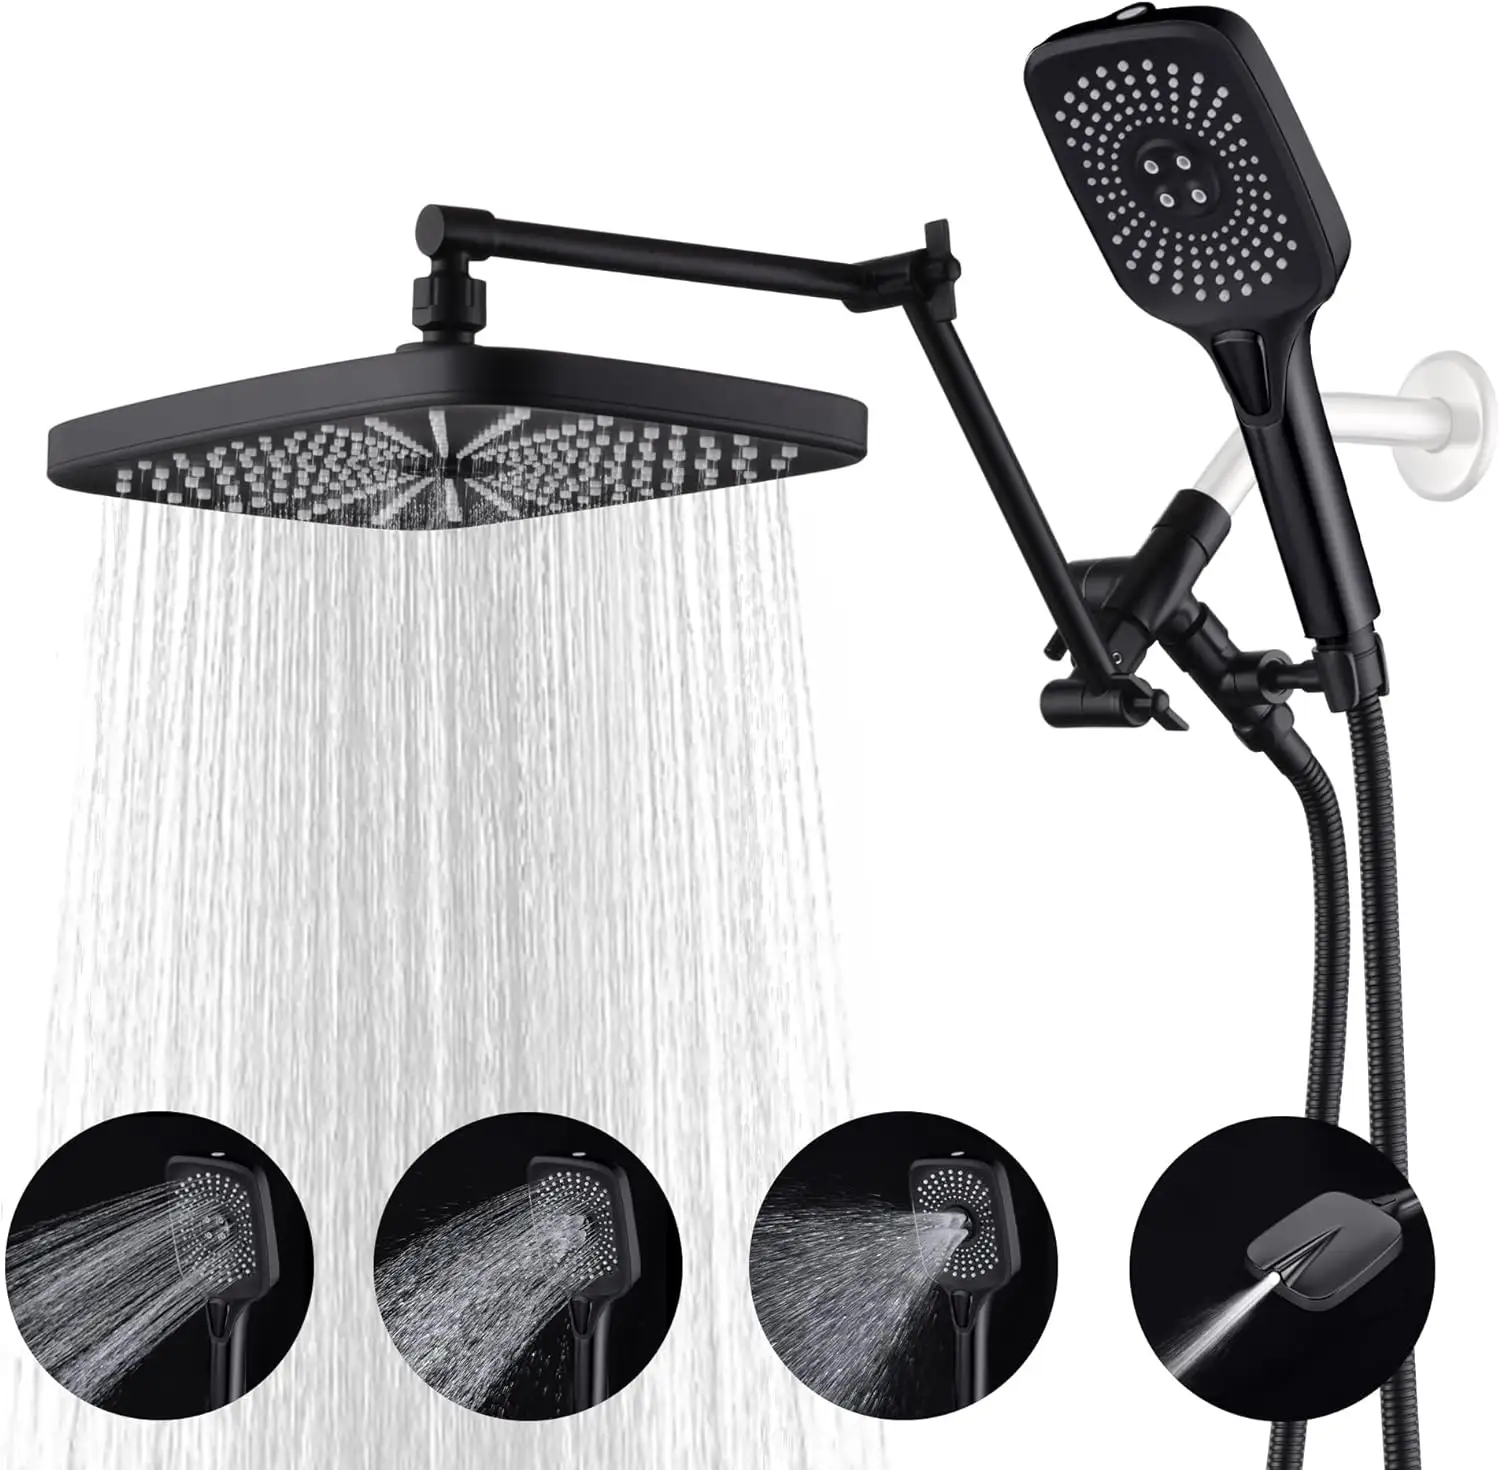 Matte Black High Pressure Rain Shower Head Combo With 2 stage Foldable Extension Arm and 4-Spray Handheld Shower Head